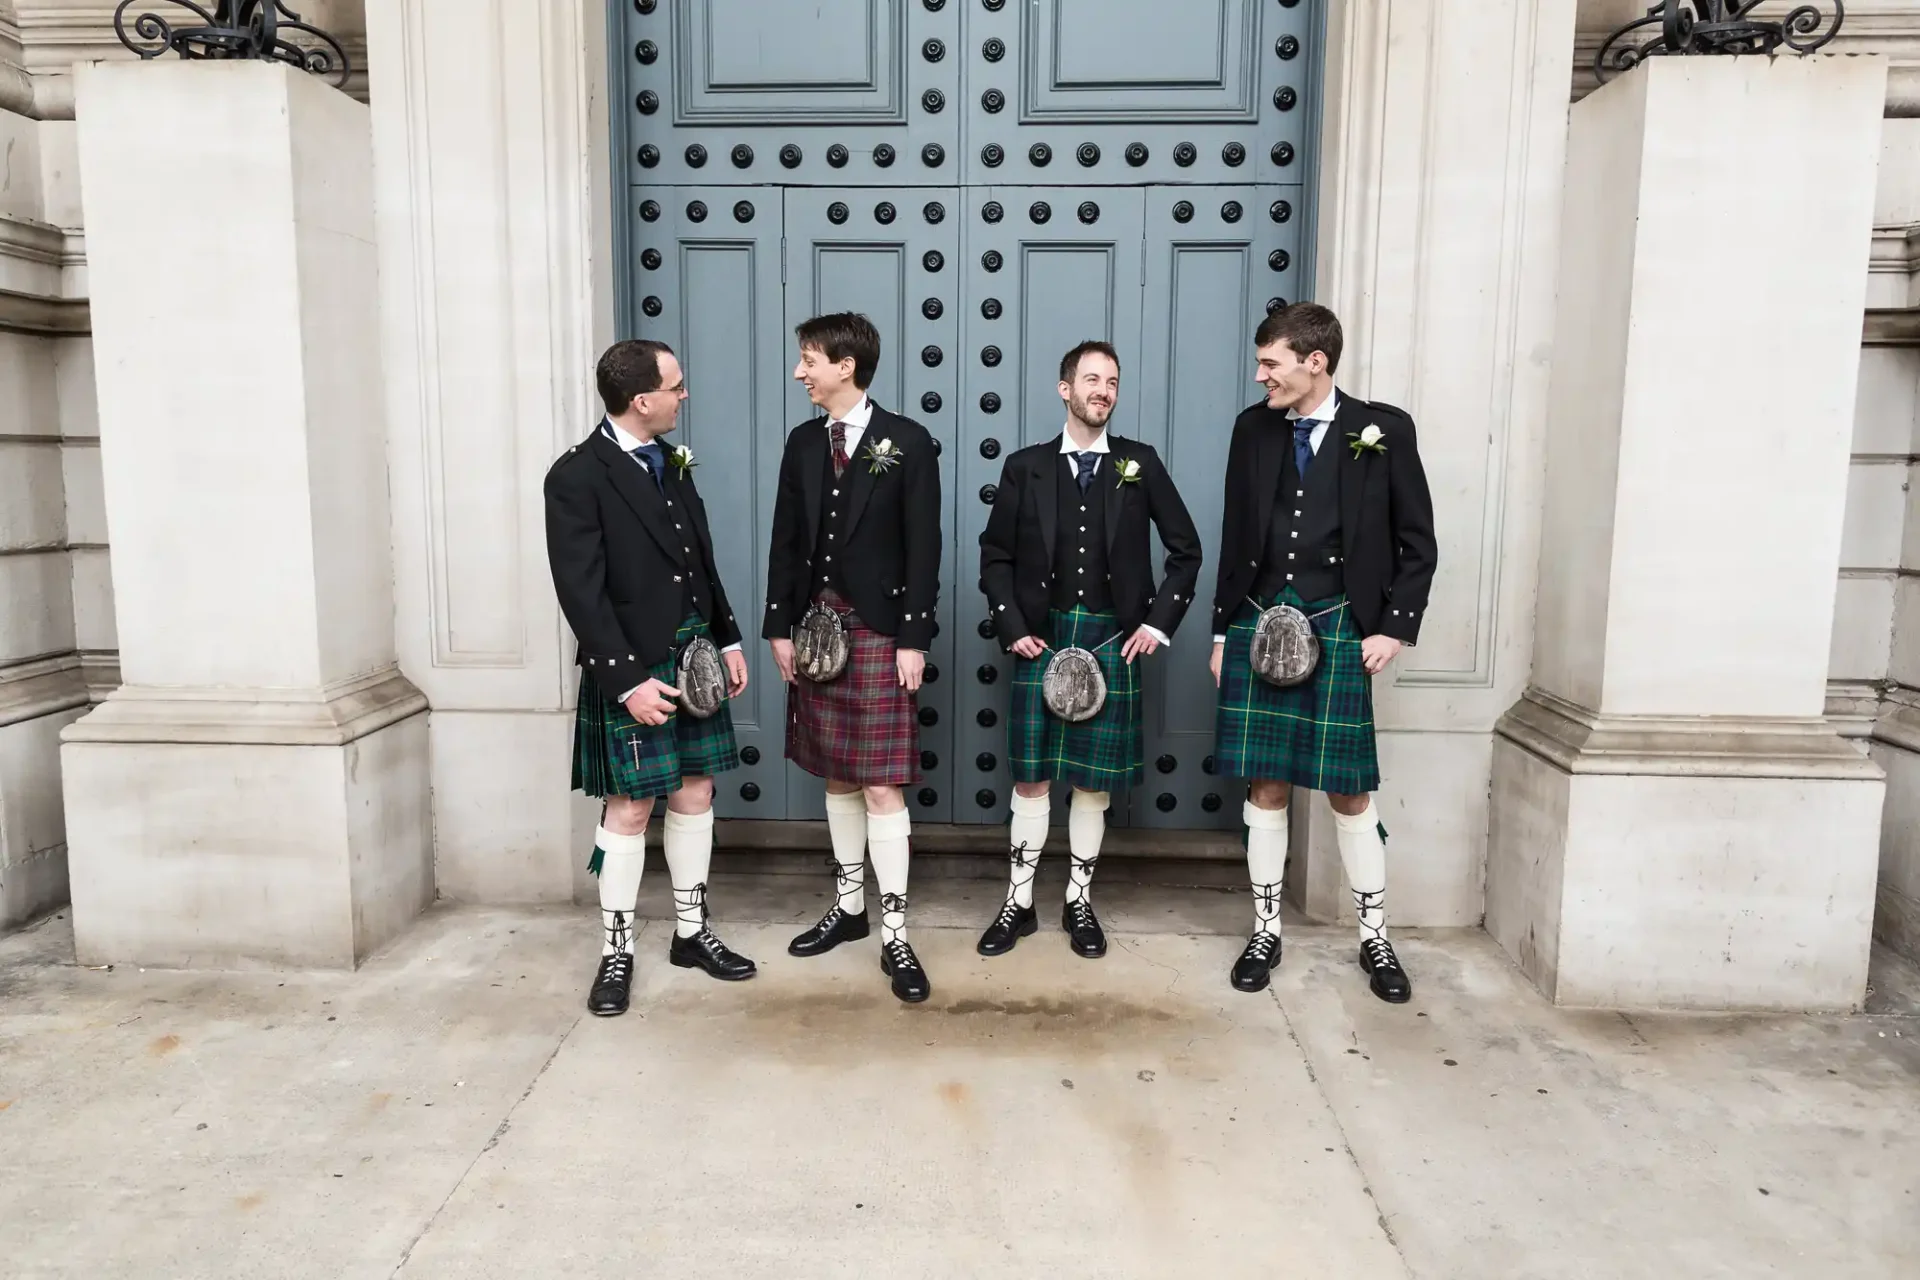 Four men in traditional scottish kilts and jackets, laughing and talking in front of a large blue door.